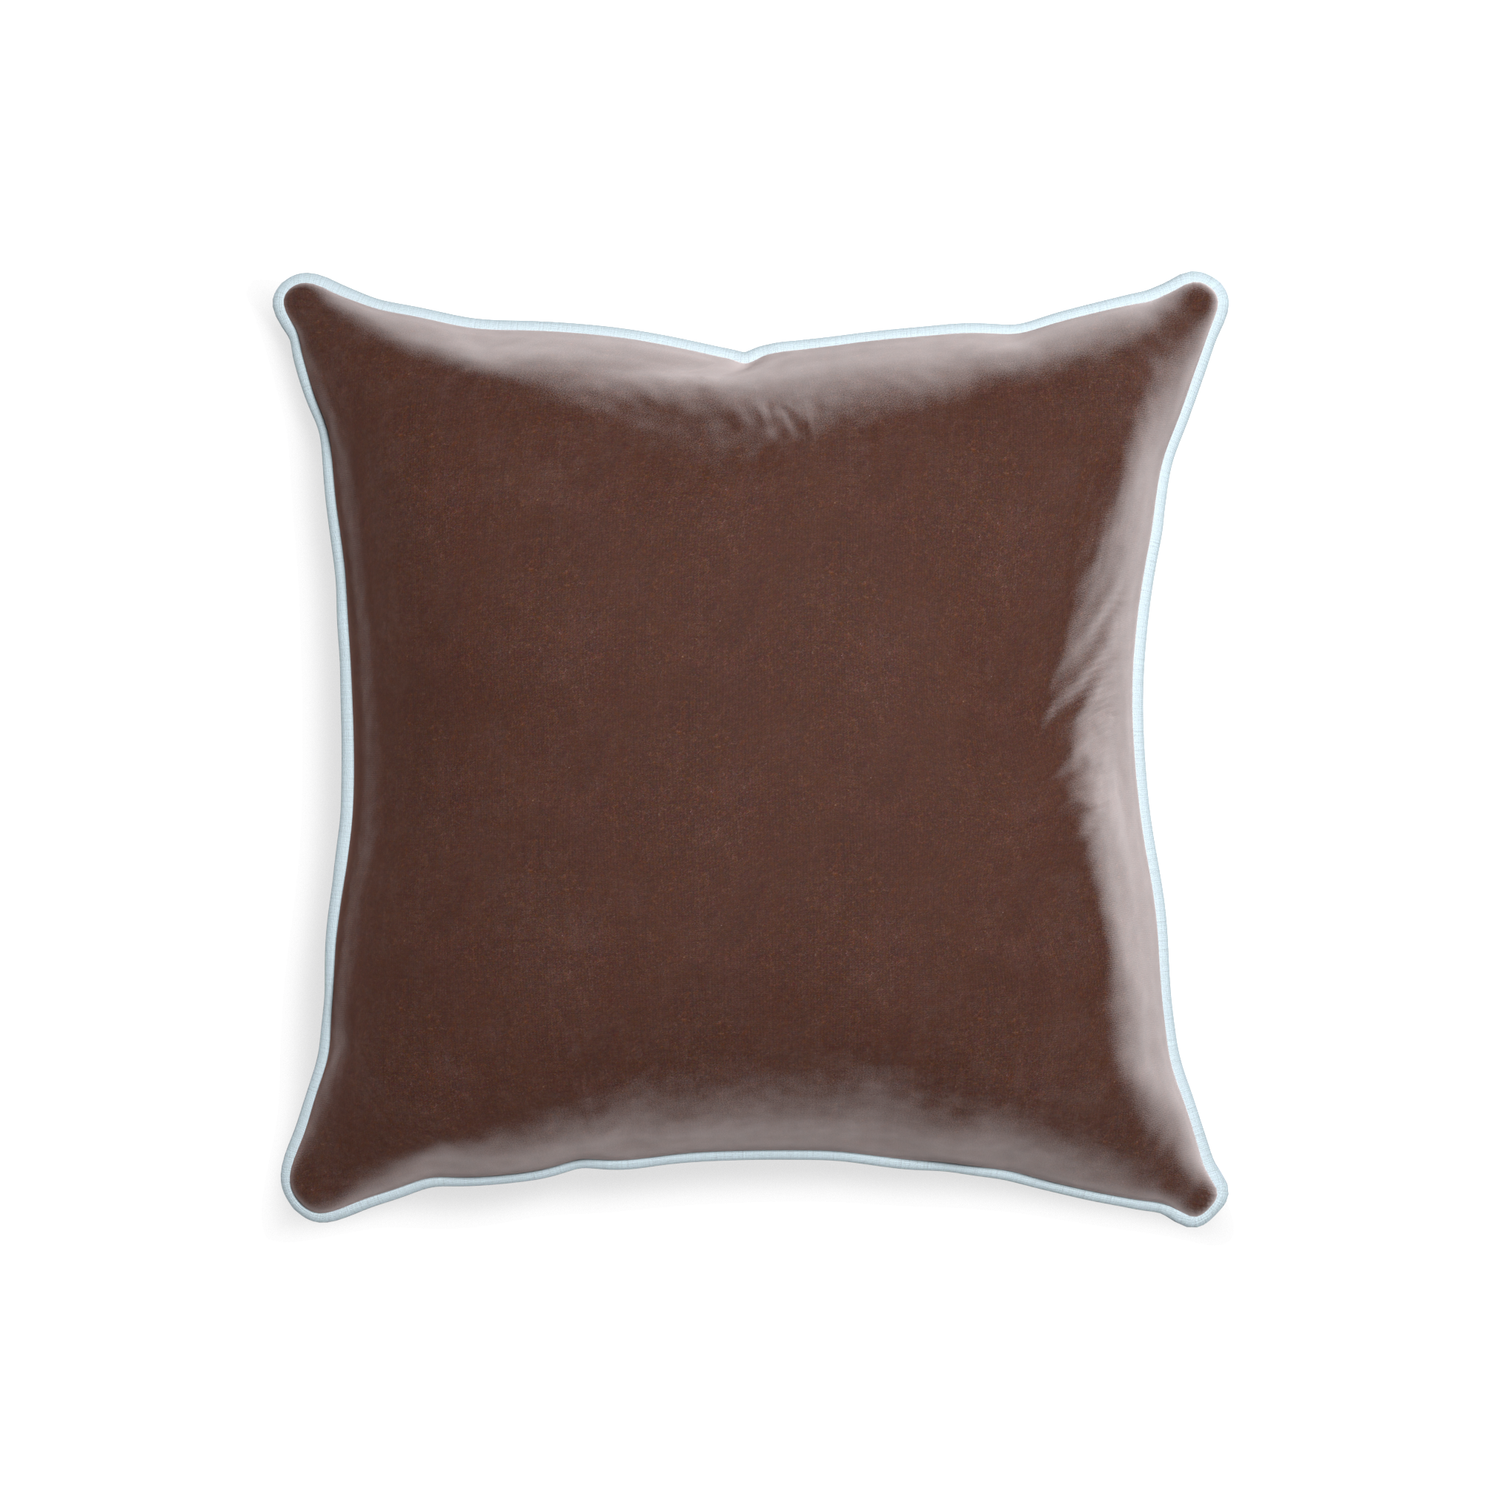 20-square walnut velvet custom pillow with powder piping on white background